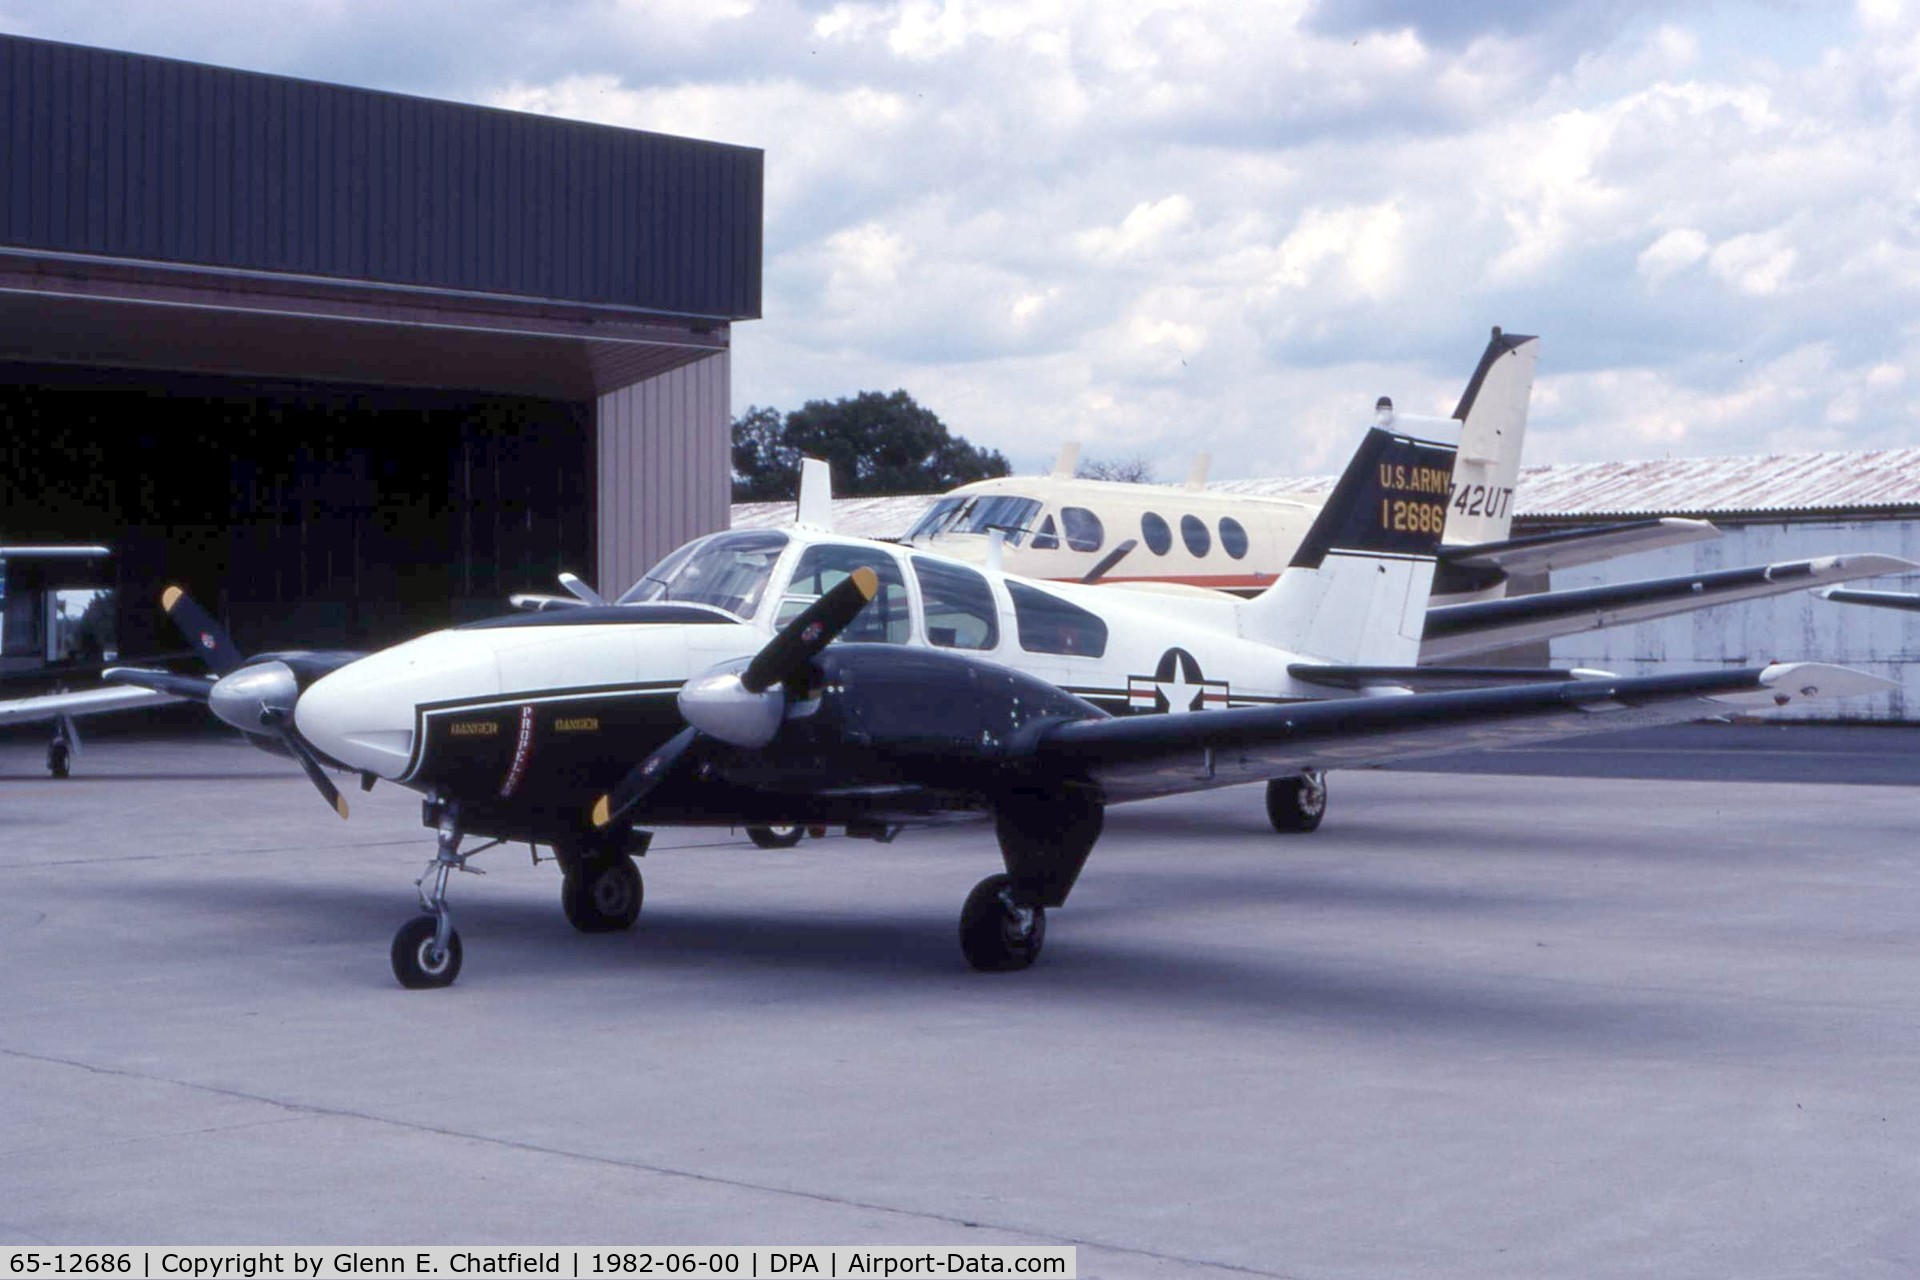 65-12686, 1965 Beech B-55 Baron (T-42A) C/N TF-8, T-42A 65-12686 at Chicago Beechcraft for service when still active Army